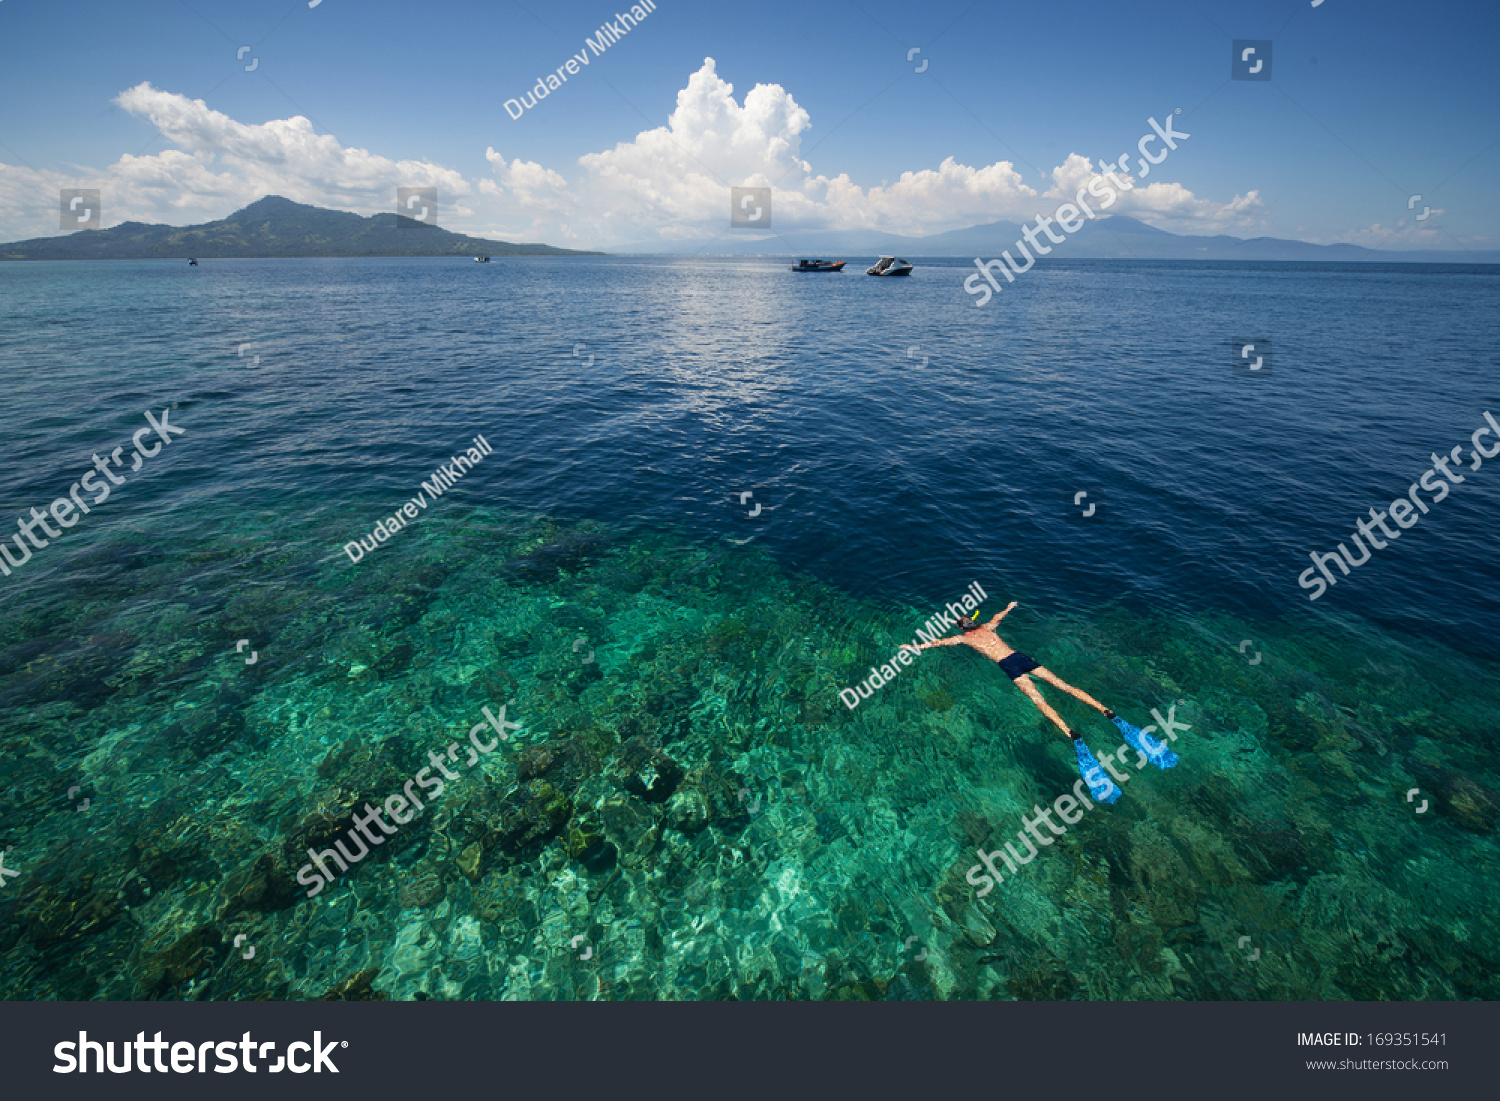 Man snorkeling in a tropical sea by reef's drop off. Indonesia #169351541